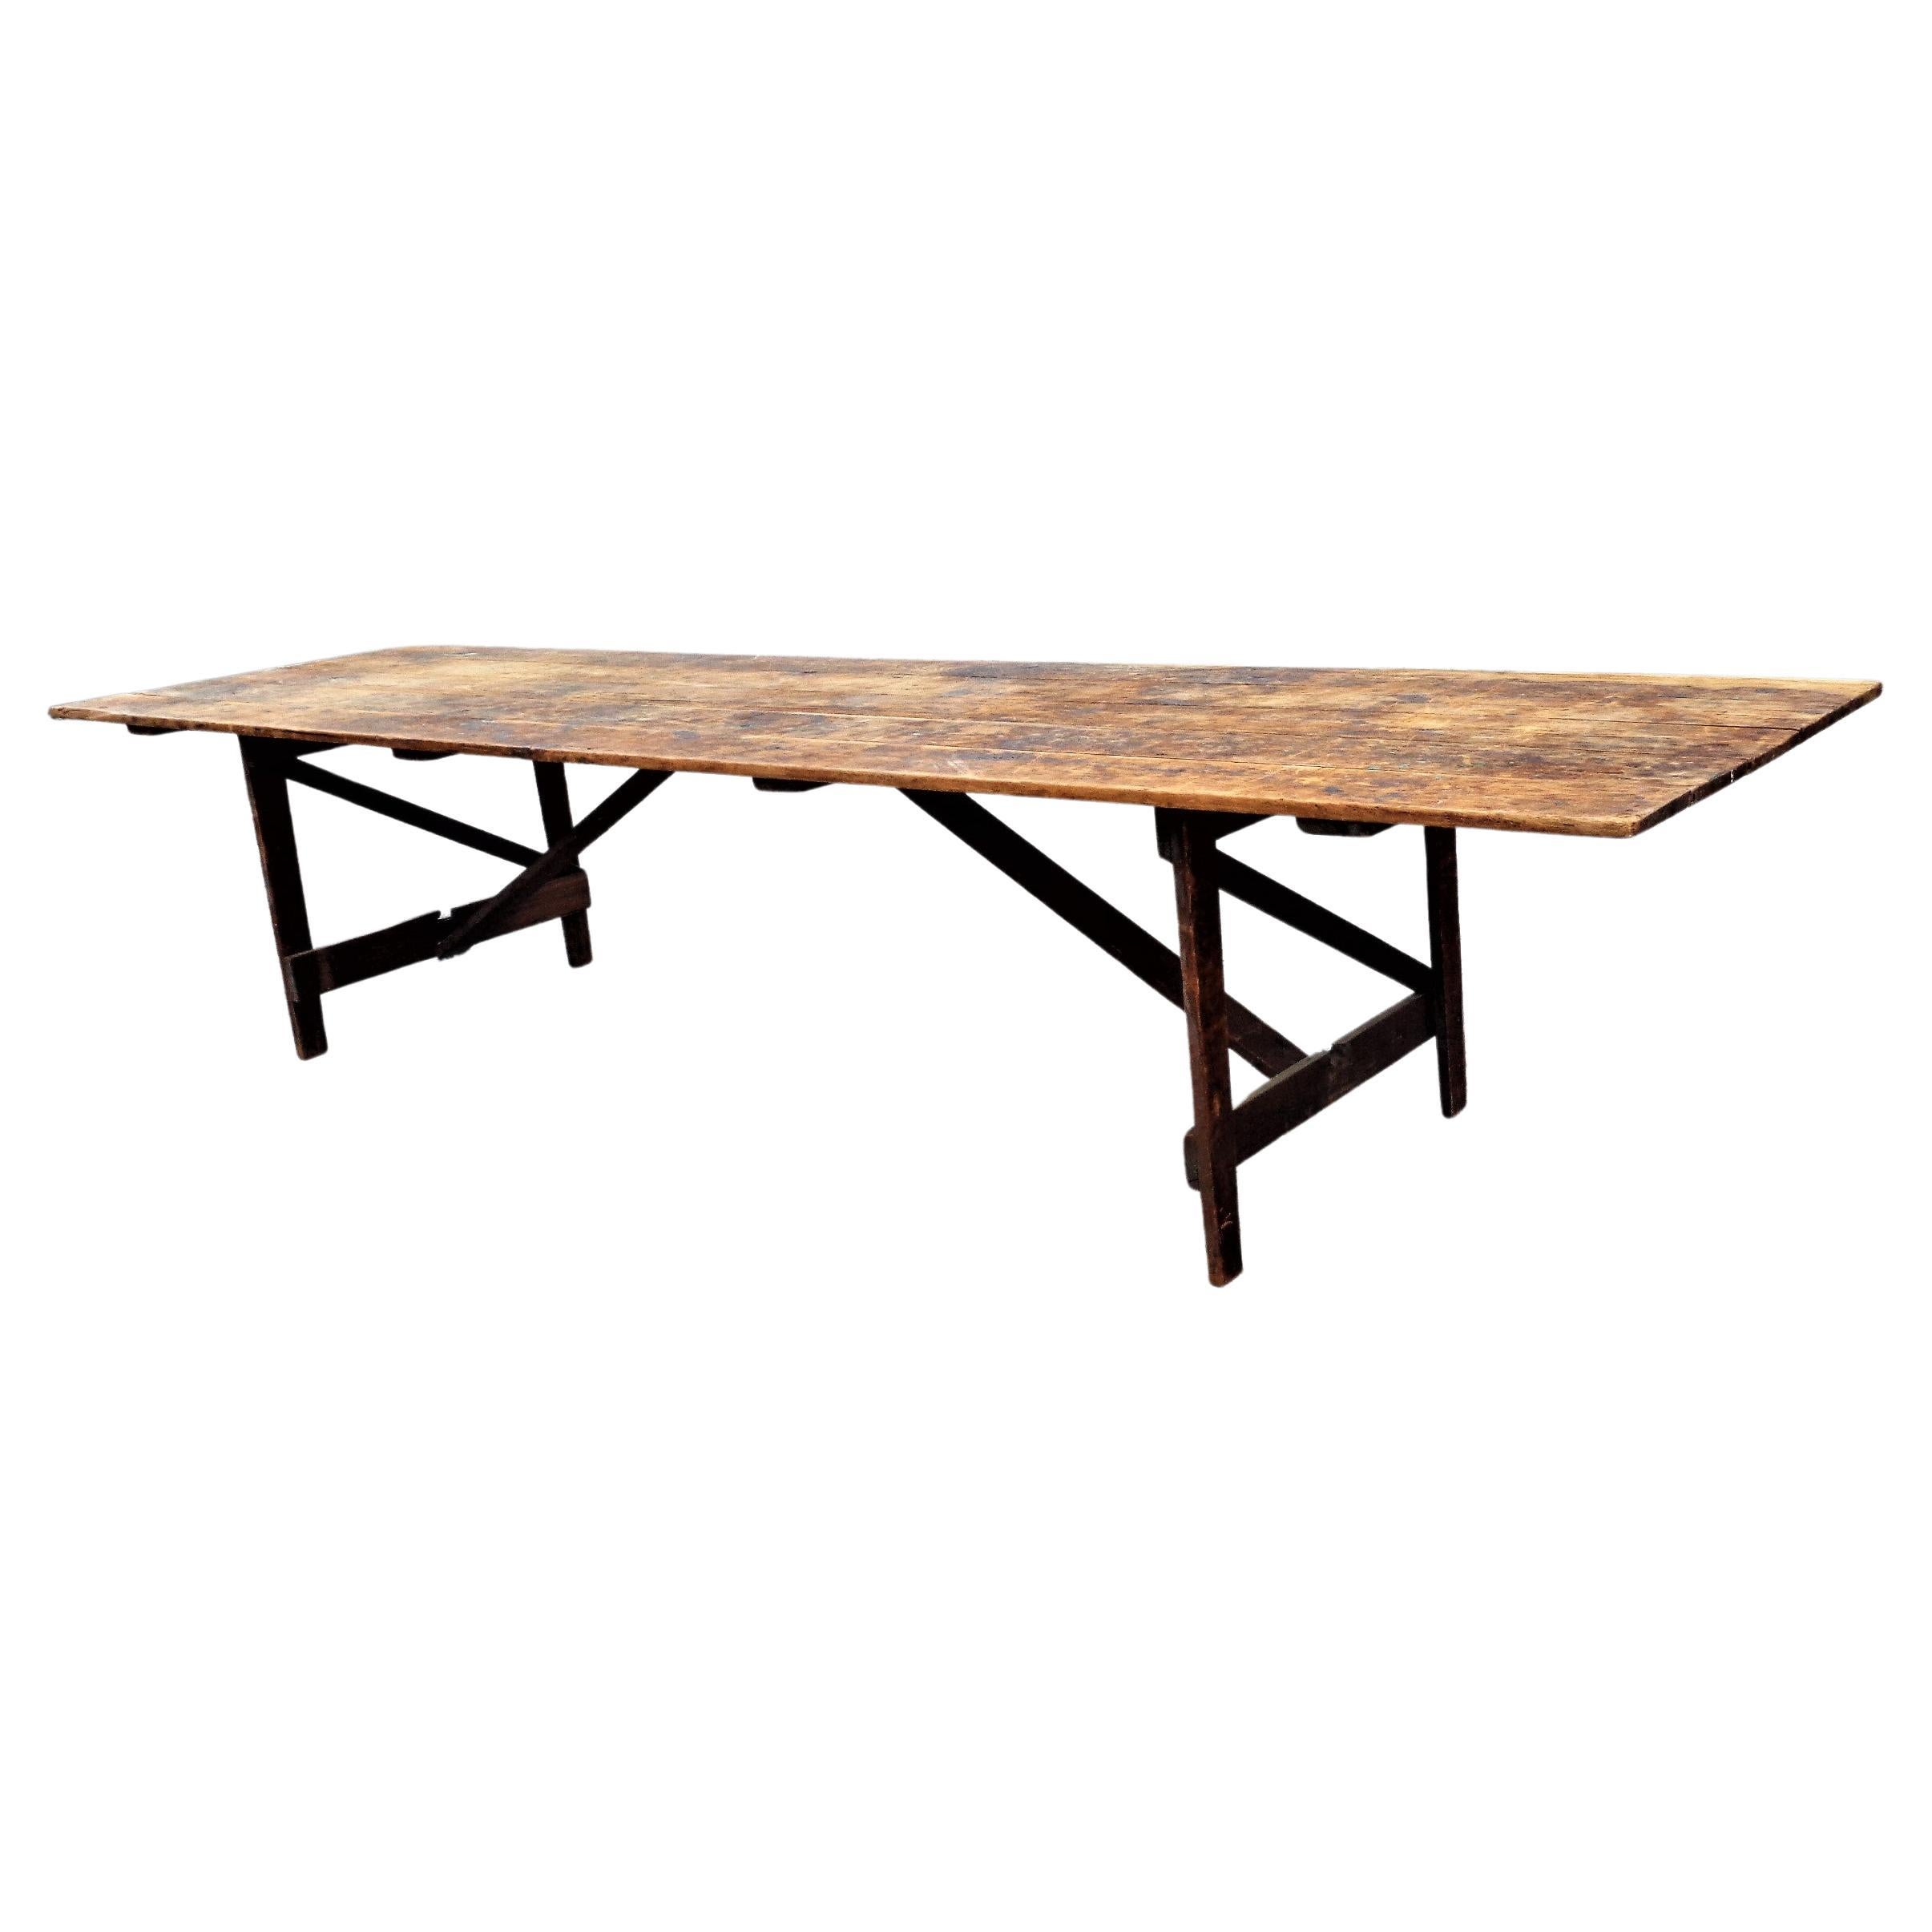 Antique American Eleven Foot Long Folding Farm Table For Sale